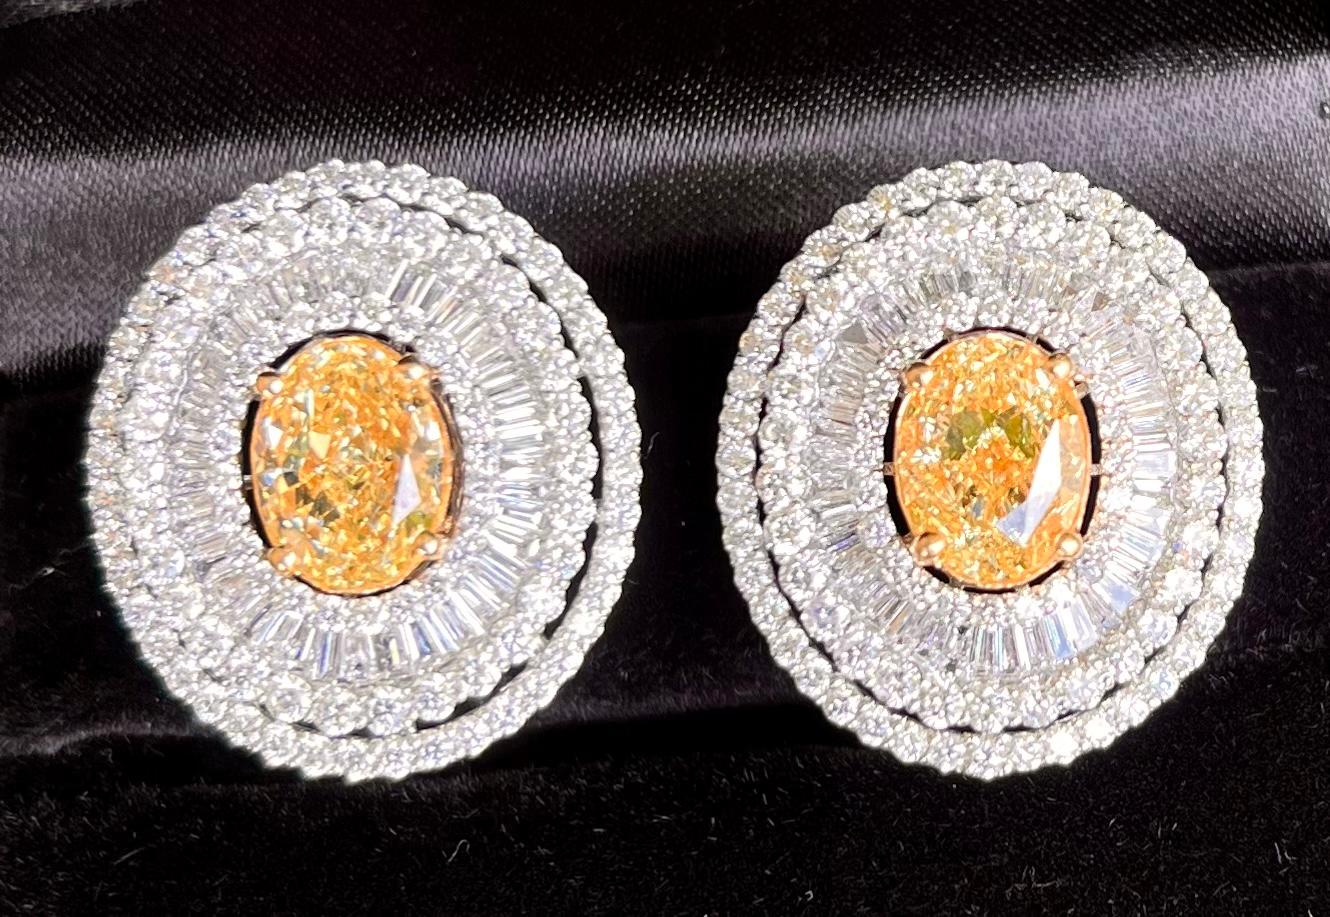 Phenomenal pair of ladies 18 karat white gold oval shaped diamond ballerina style earrings feature in the center of each earring one large oval modified brilliant cut natural fancy yellow diamond.  Each fancy yellow diamond is prong set in 18 karat